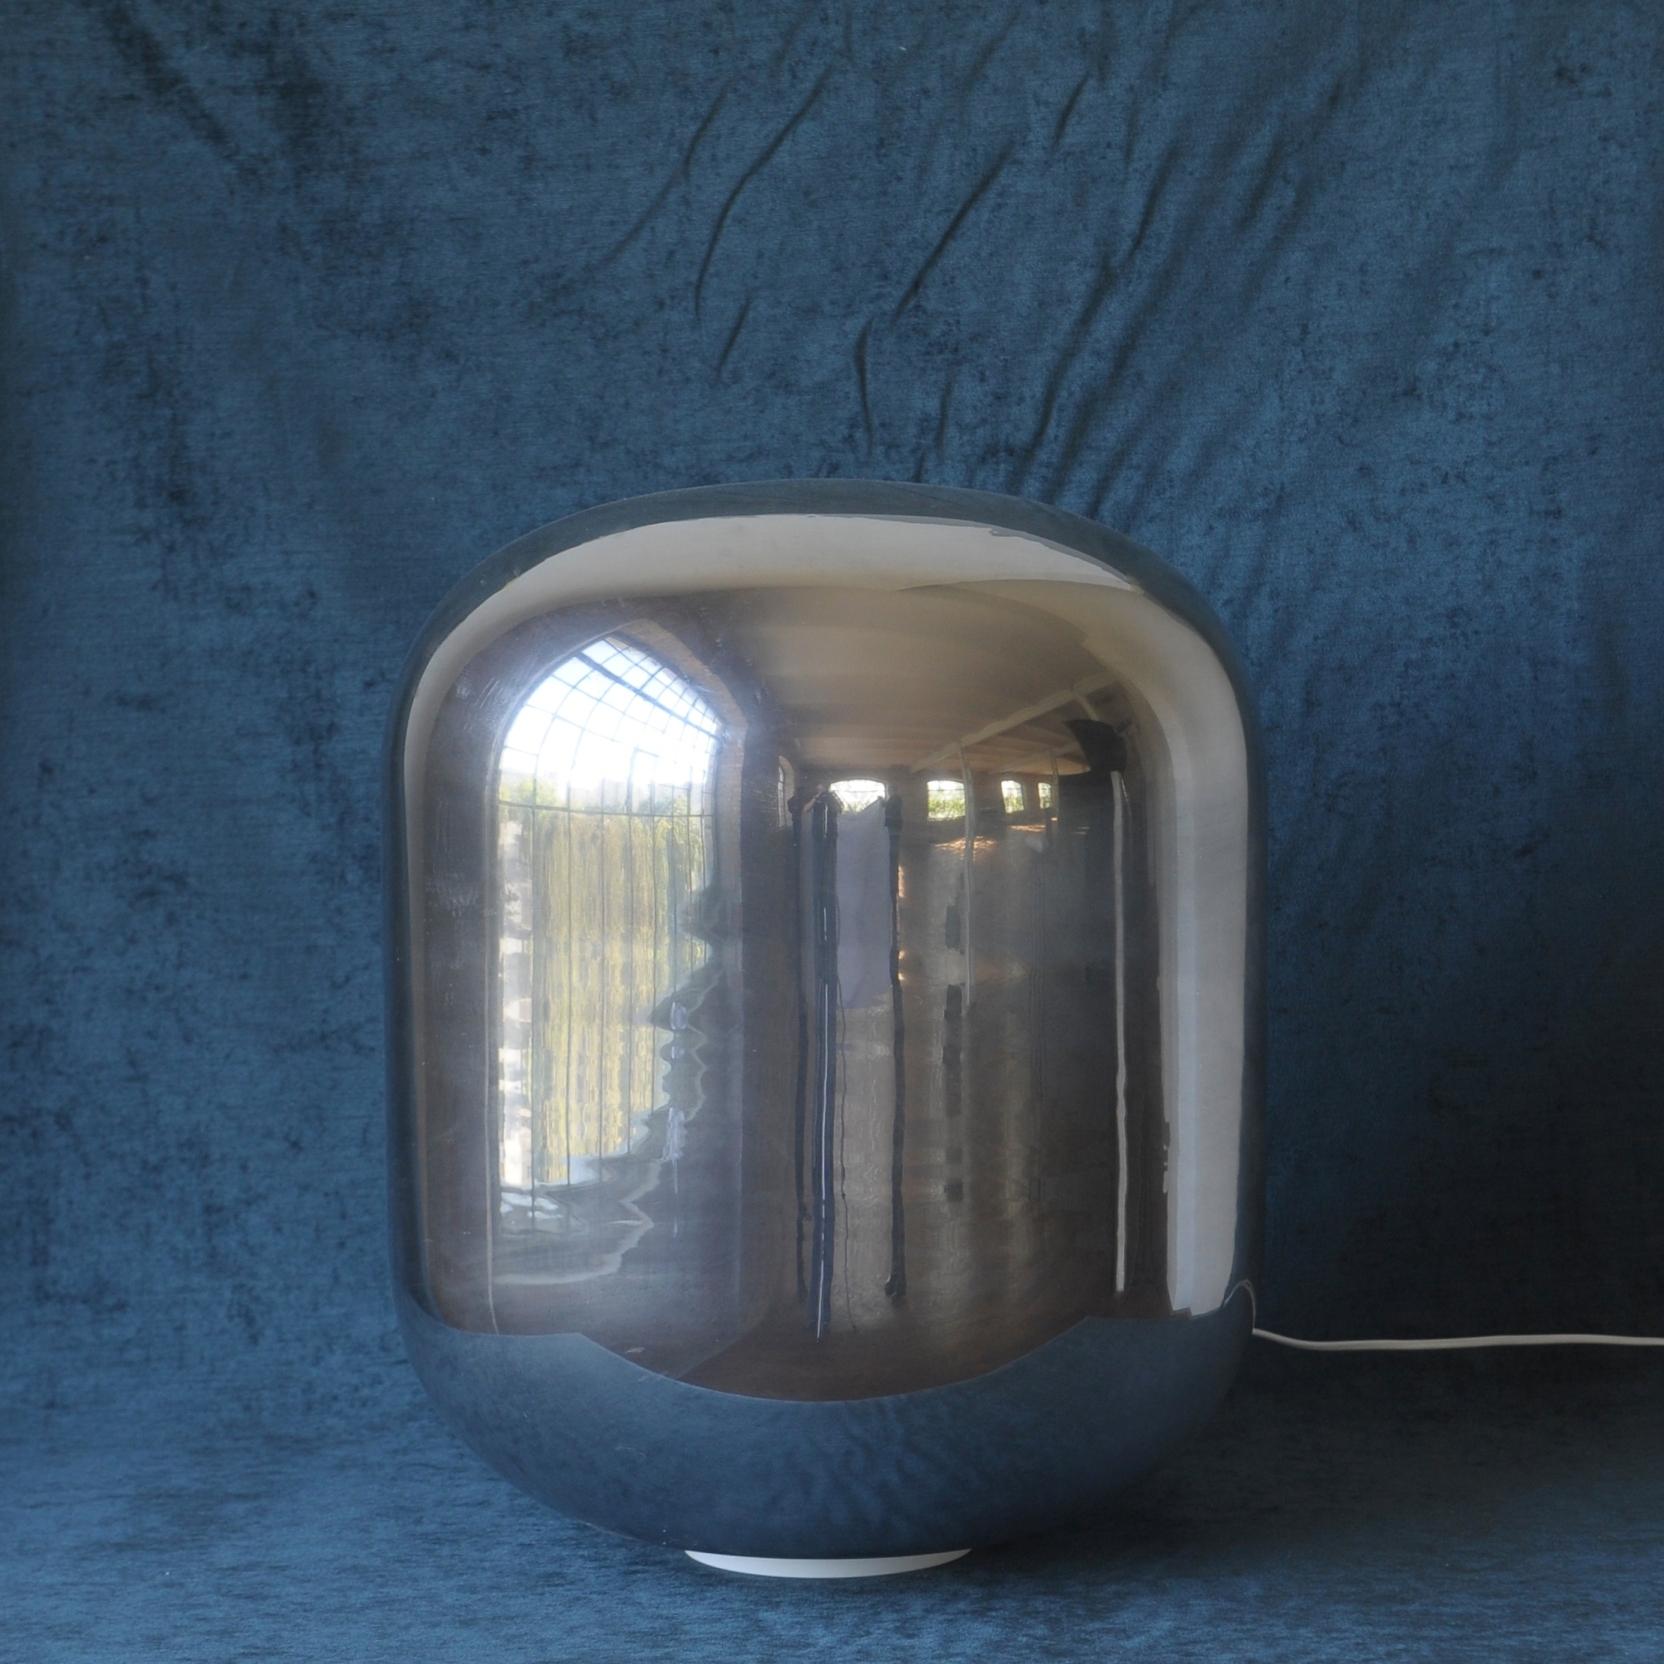 The lamp has a form of cocoon. Mirrored glass reflects when lamp is off.
The mirror effect ceases when light is on.